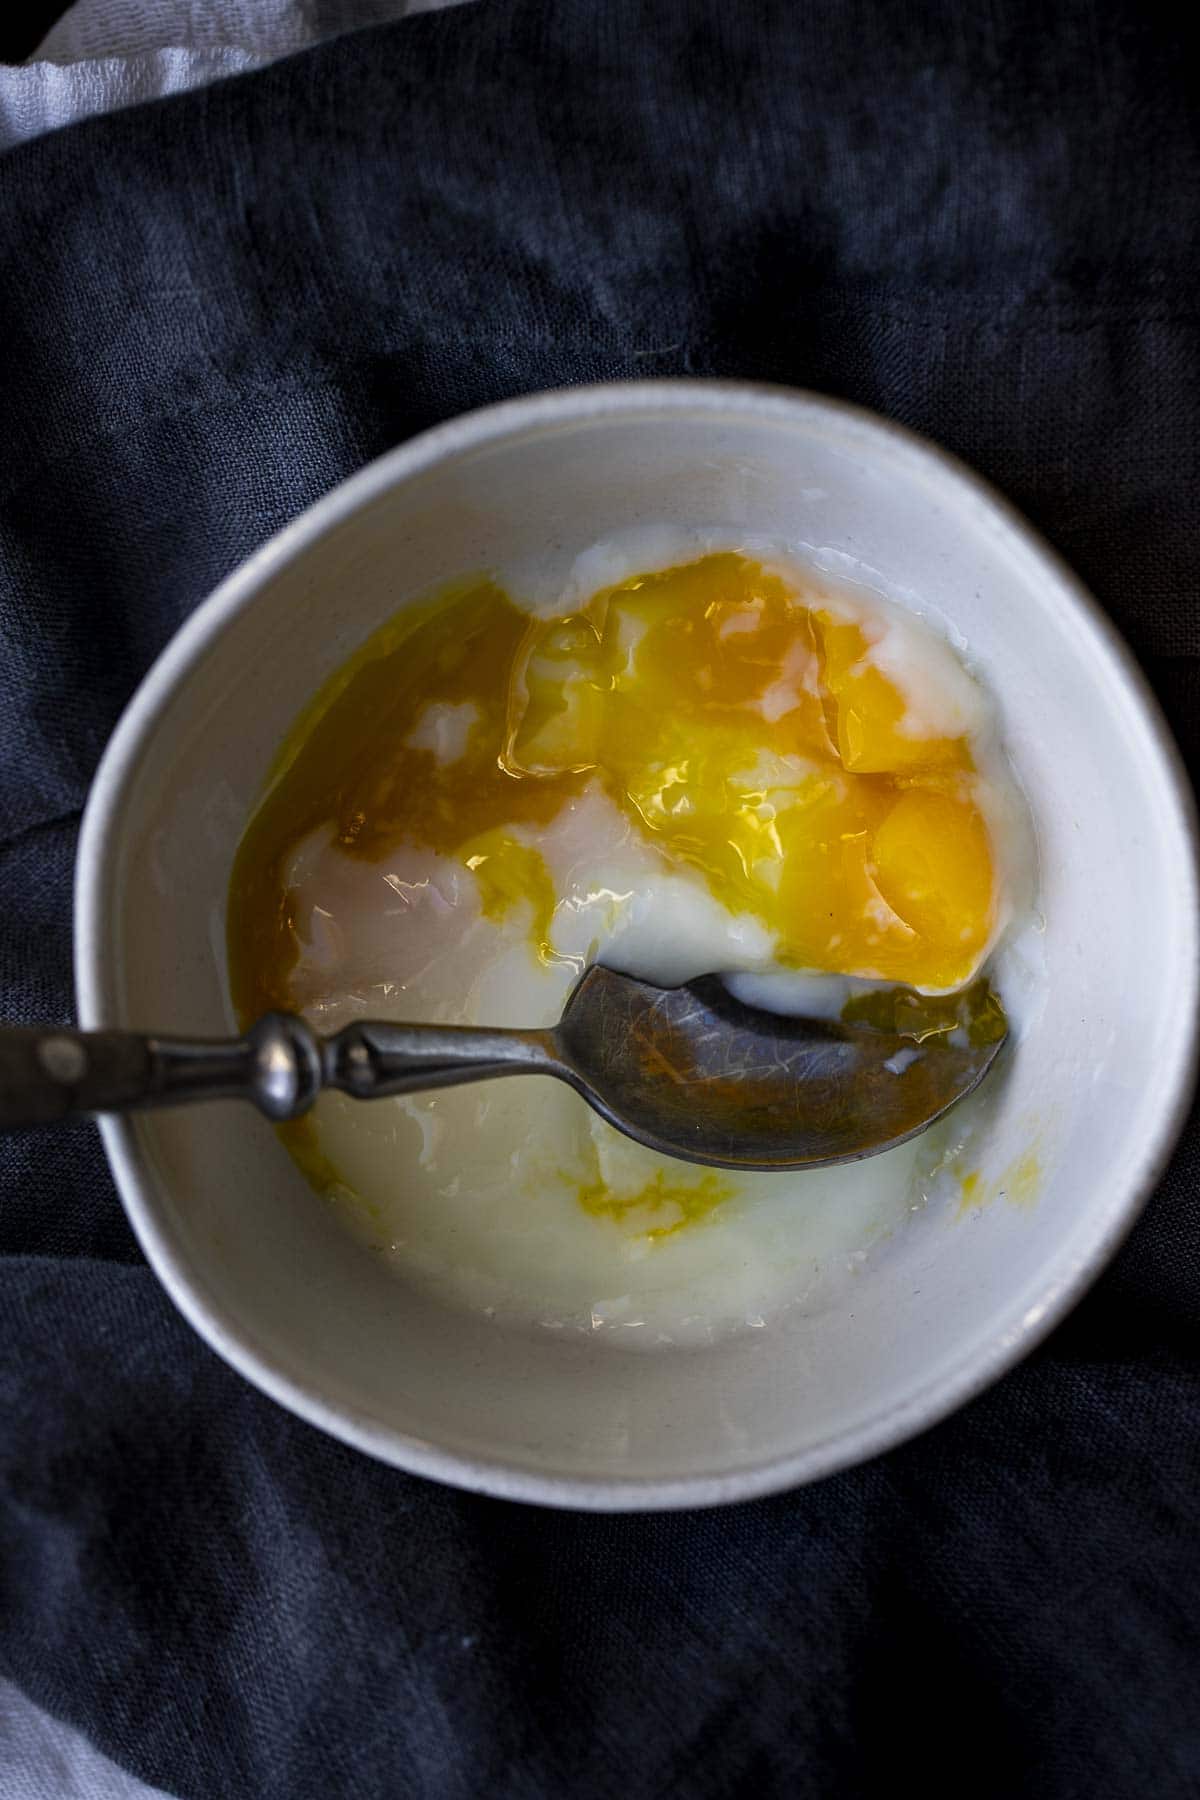 Overhead view of a poached egg in a bowl being eaten.